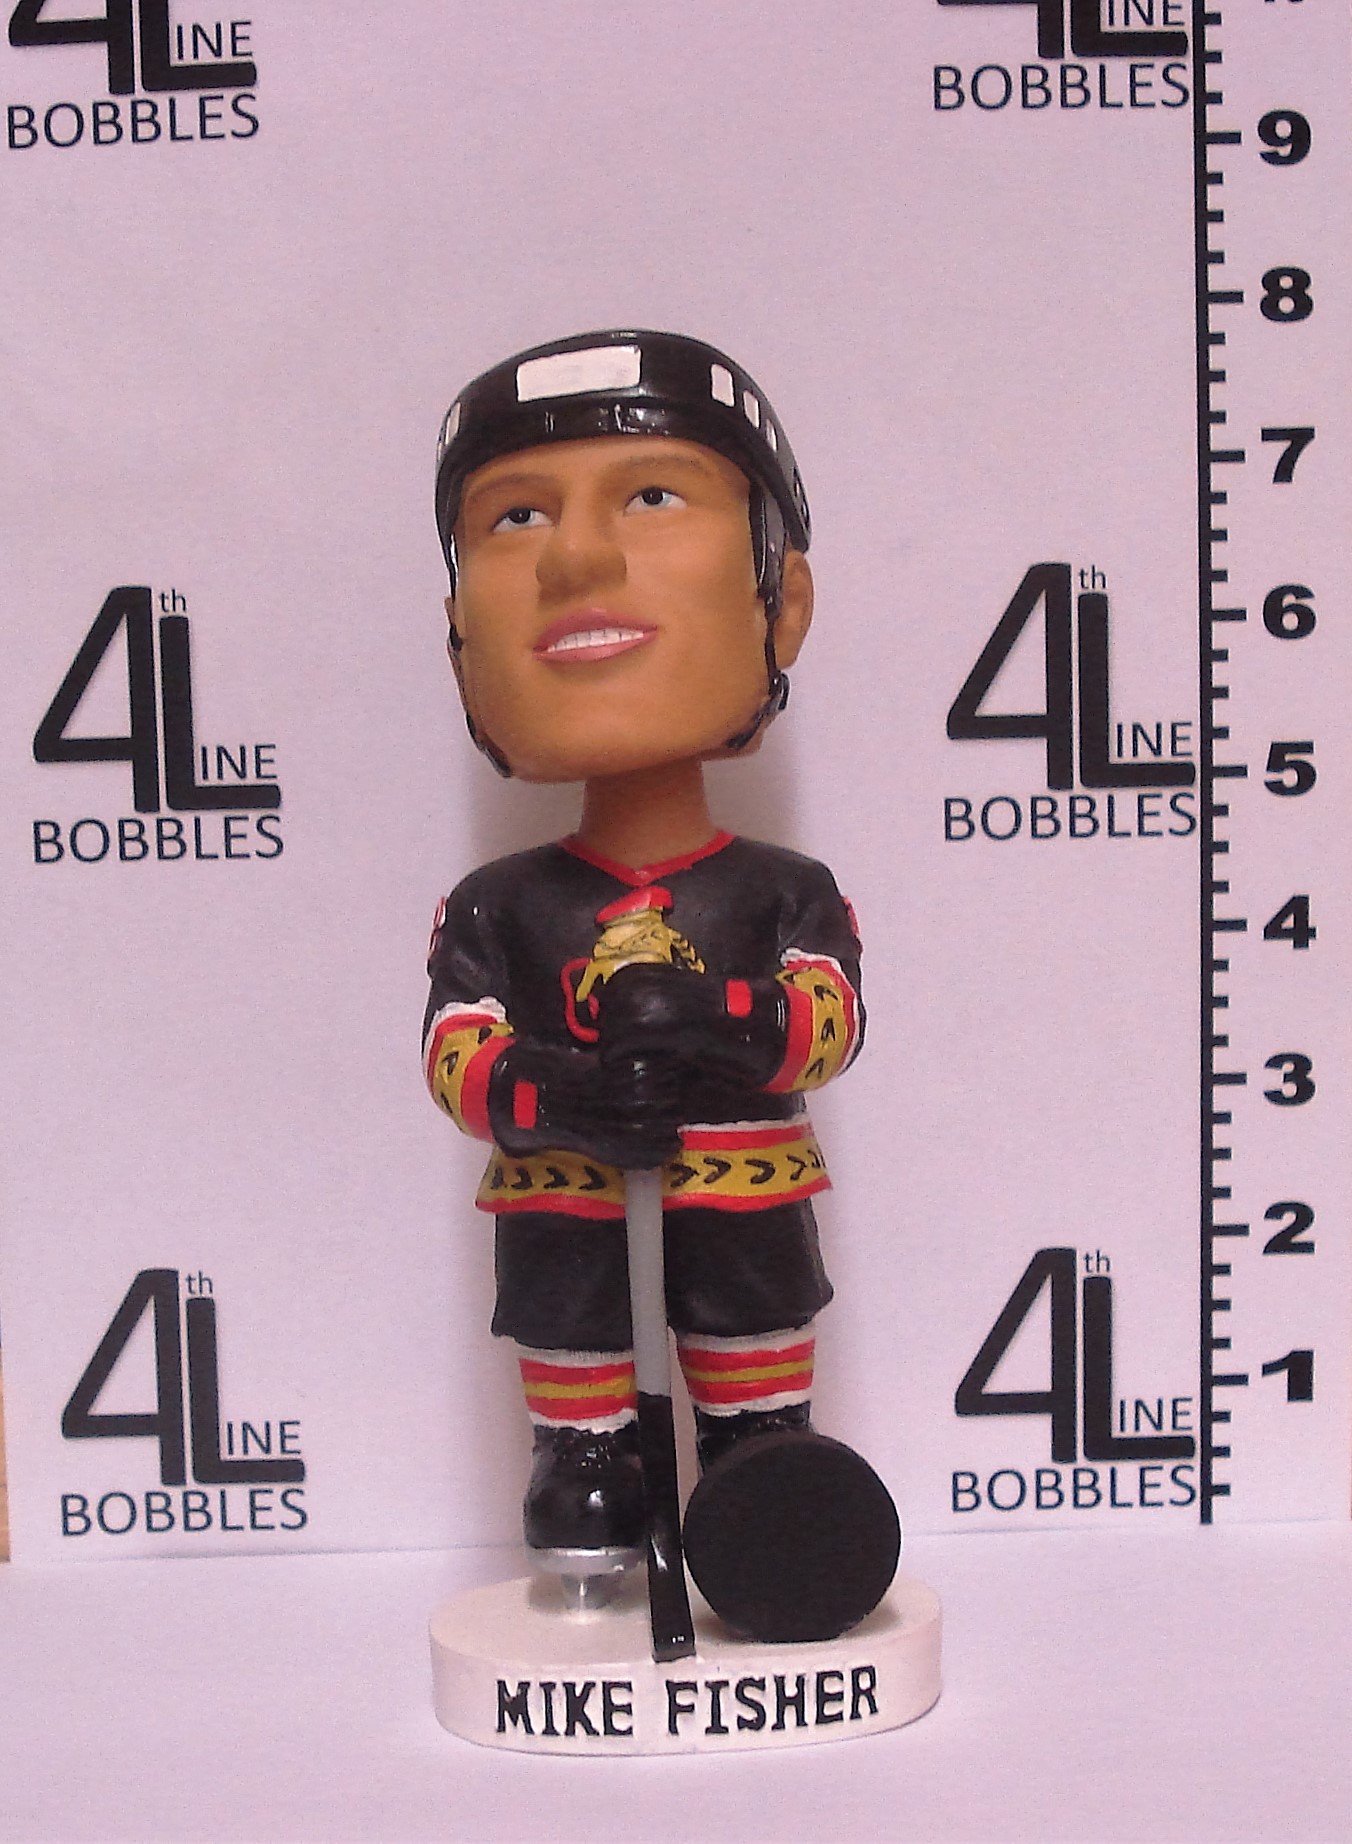 Mike Fisher bobblehead